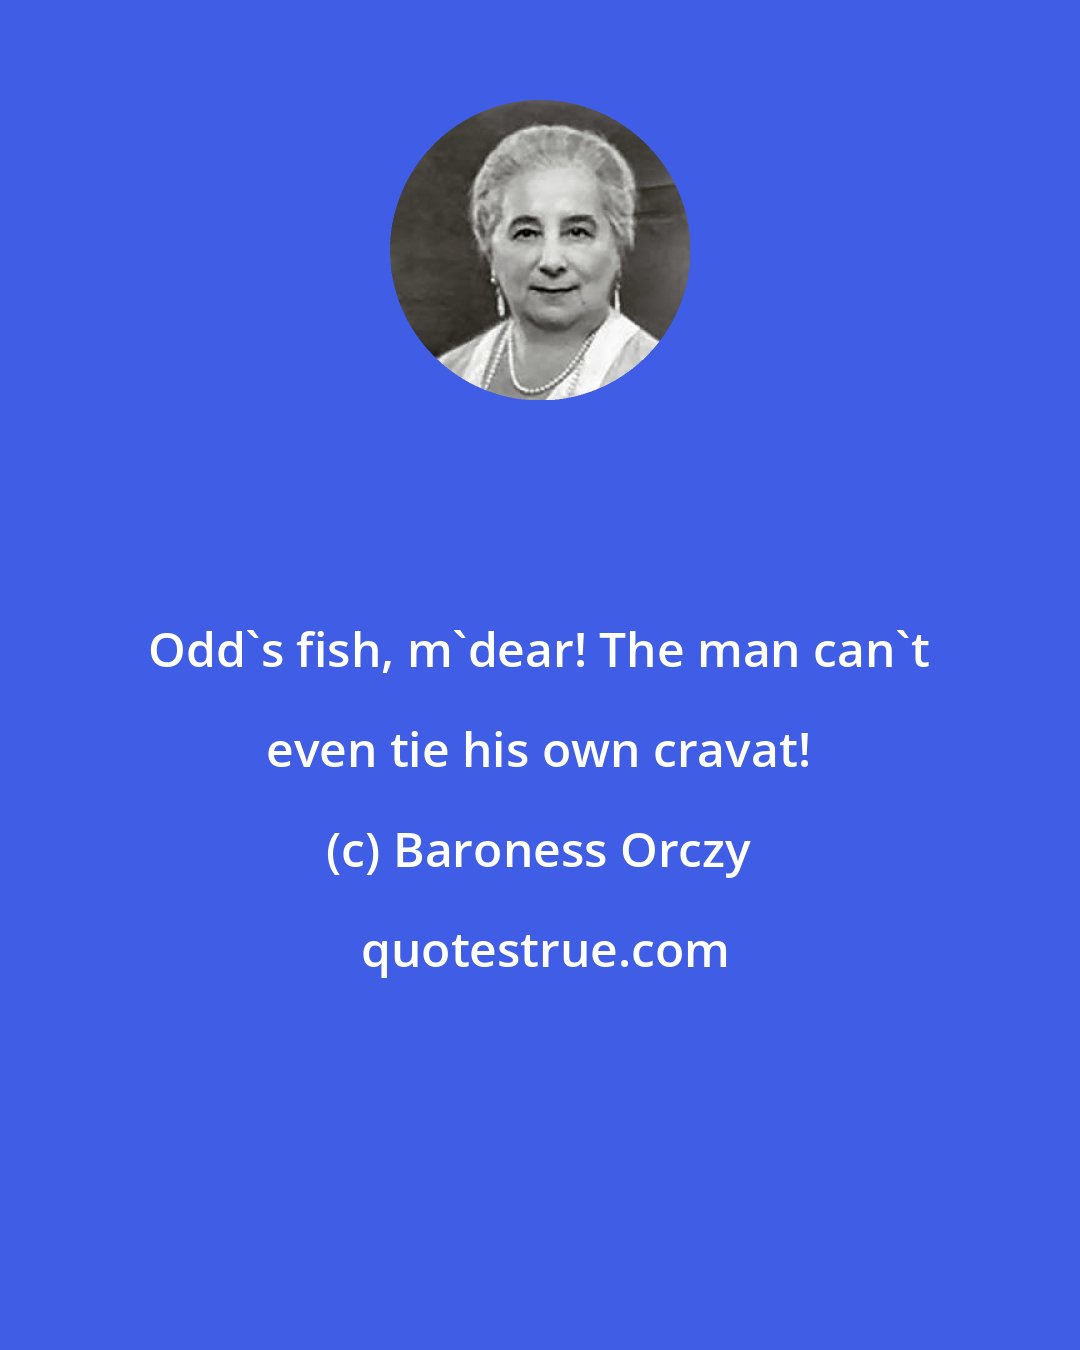 Baroness Orczy: Odd's fish, m'dear! The man can't even tie his own cravat!